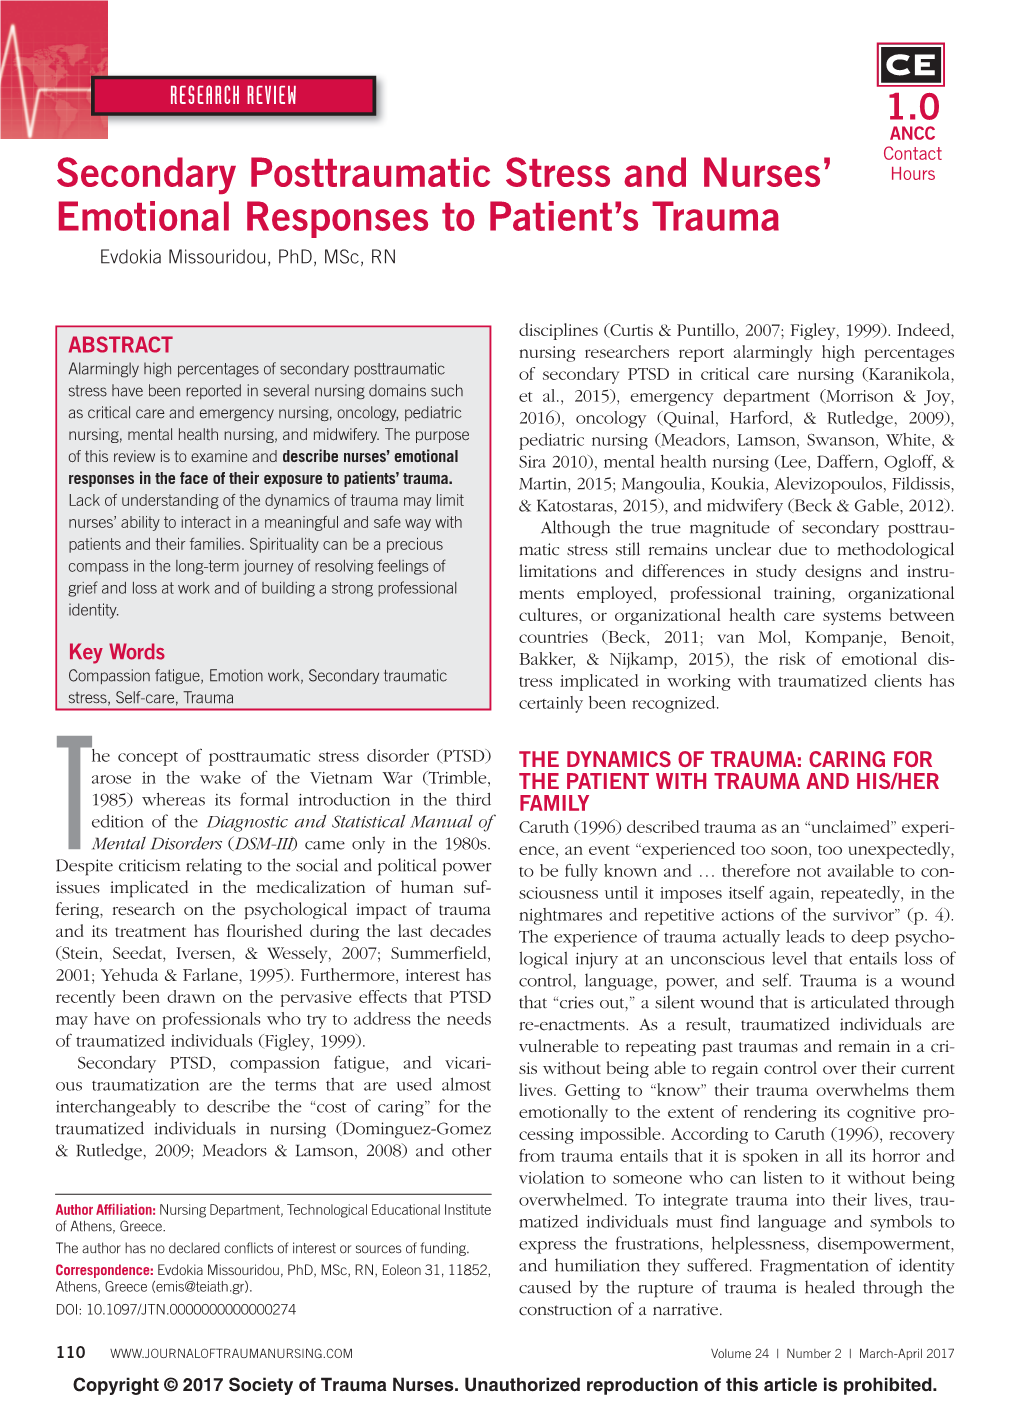 Secondary Posttraumatic Stress and Nurses' Emotional Responses To